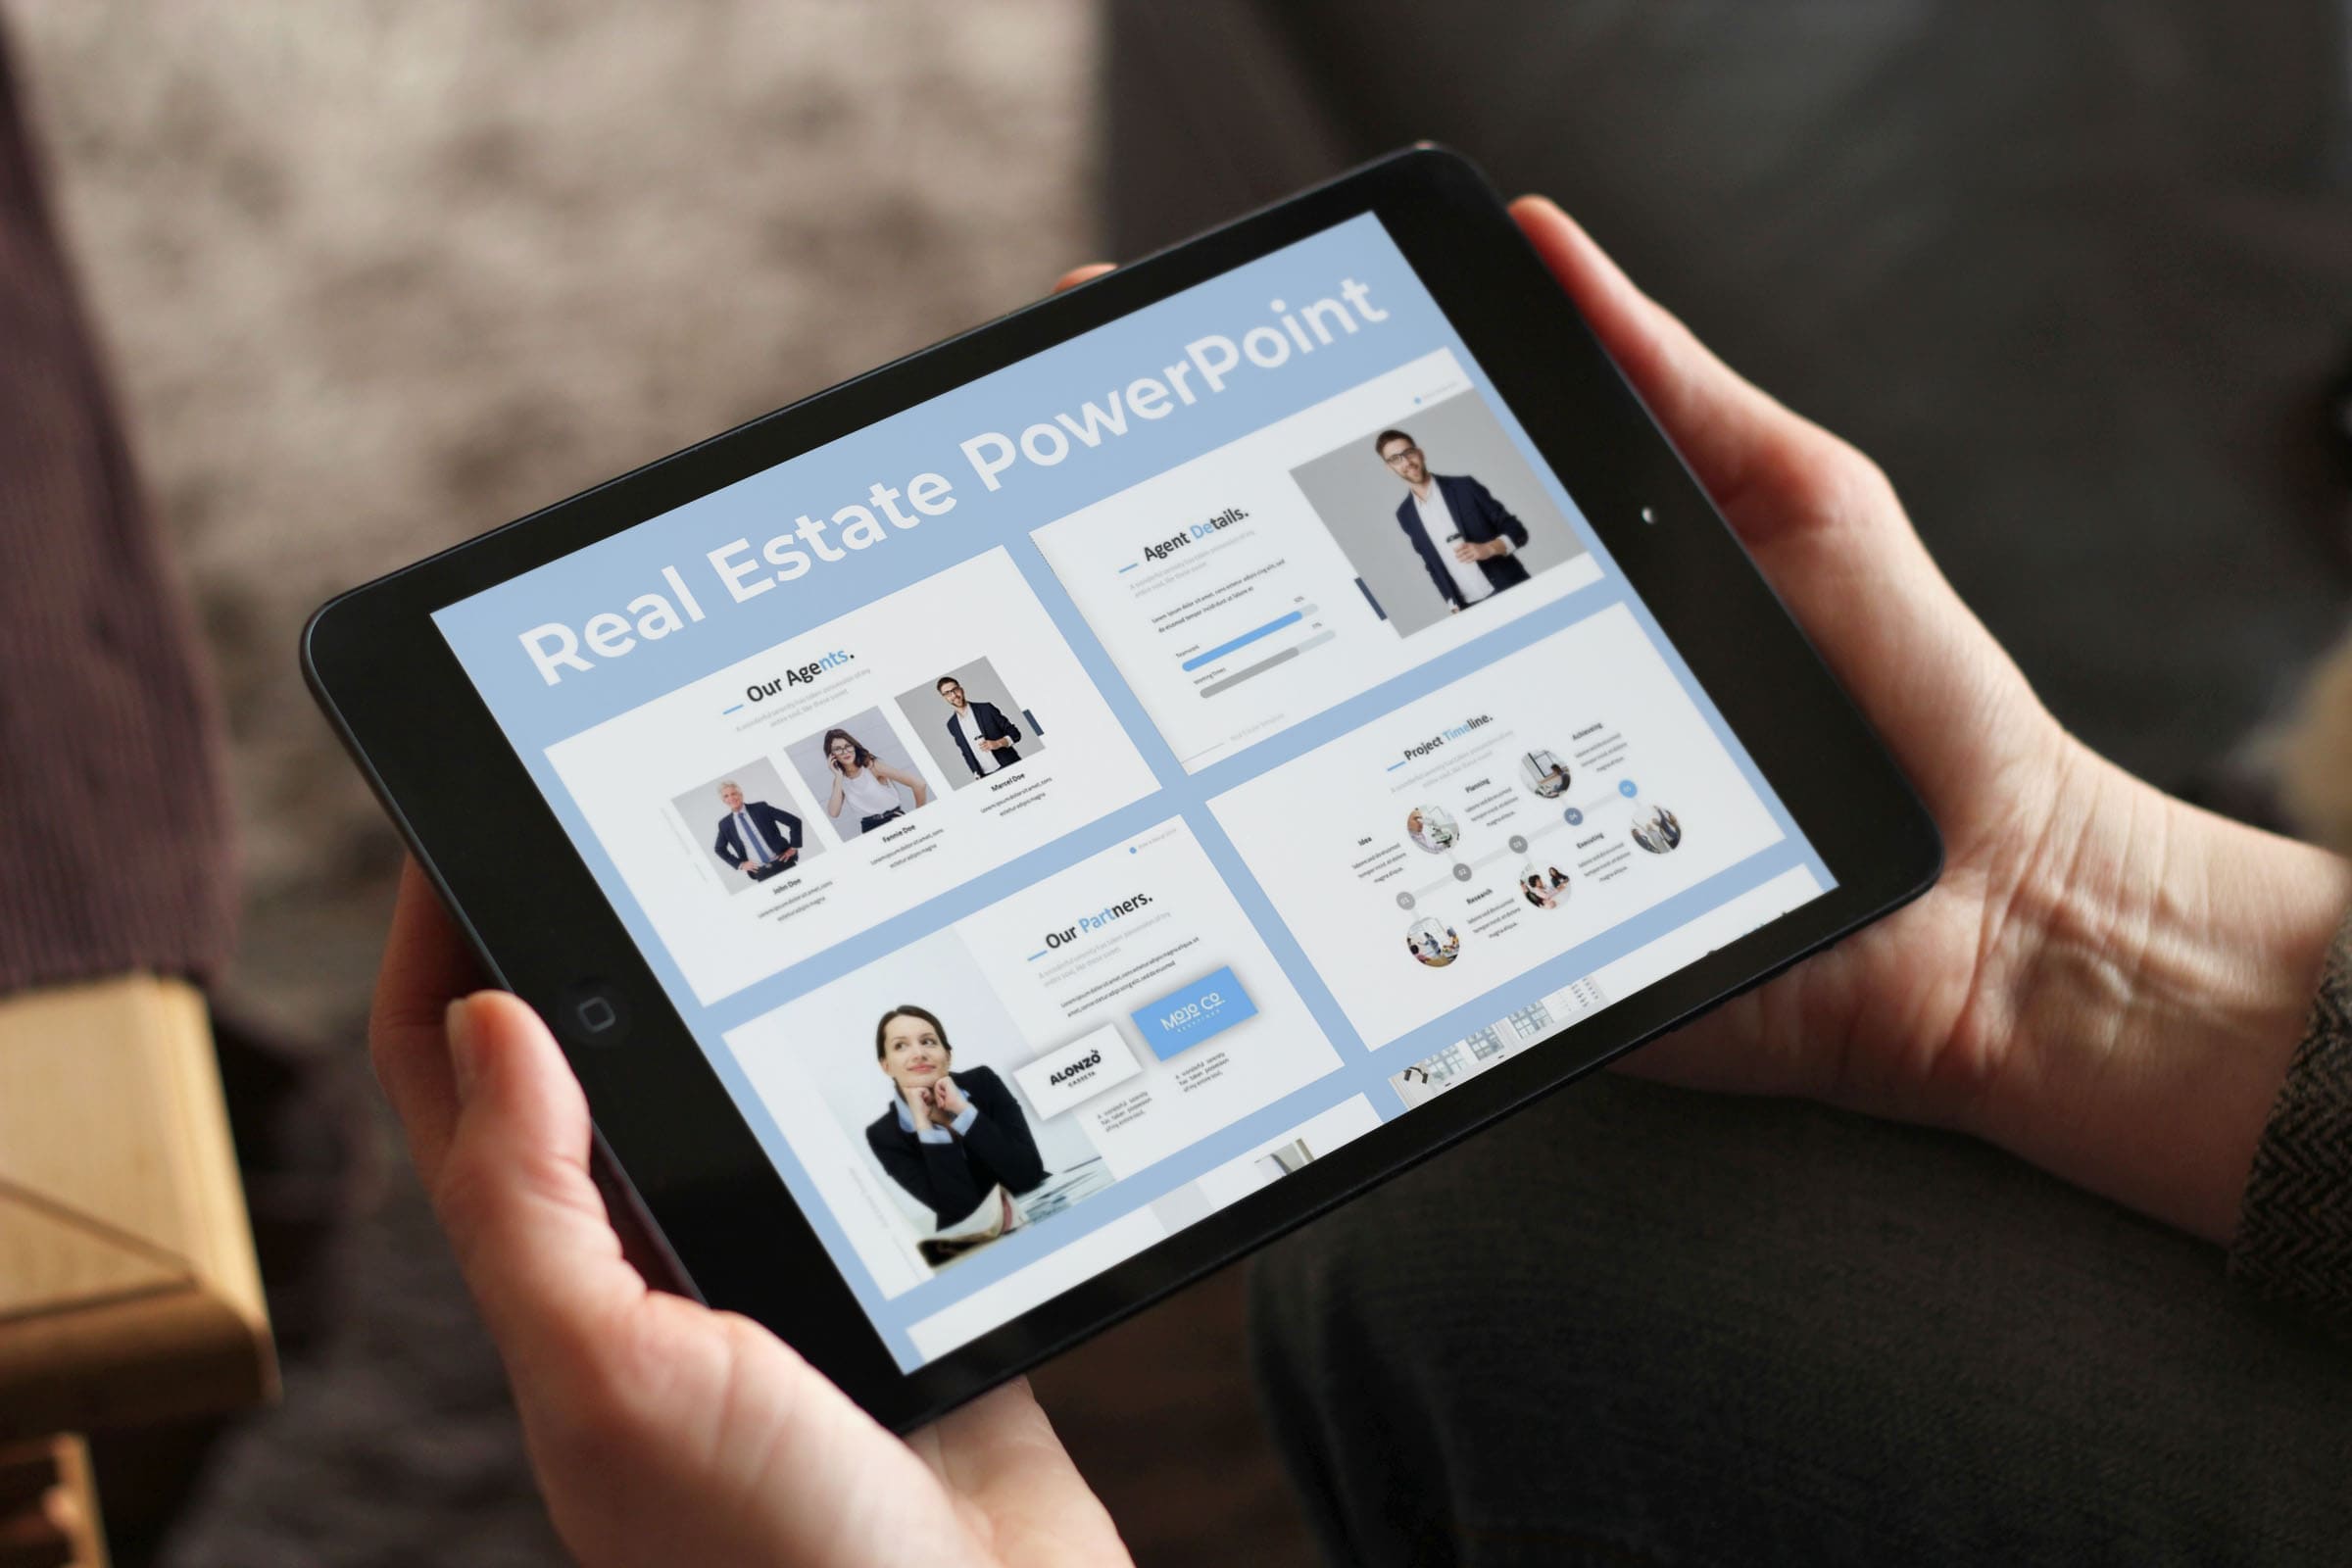 Real Estate Powerpoint Template by MasterBundles note preview mockup image.